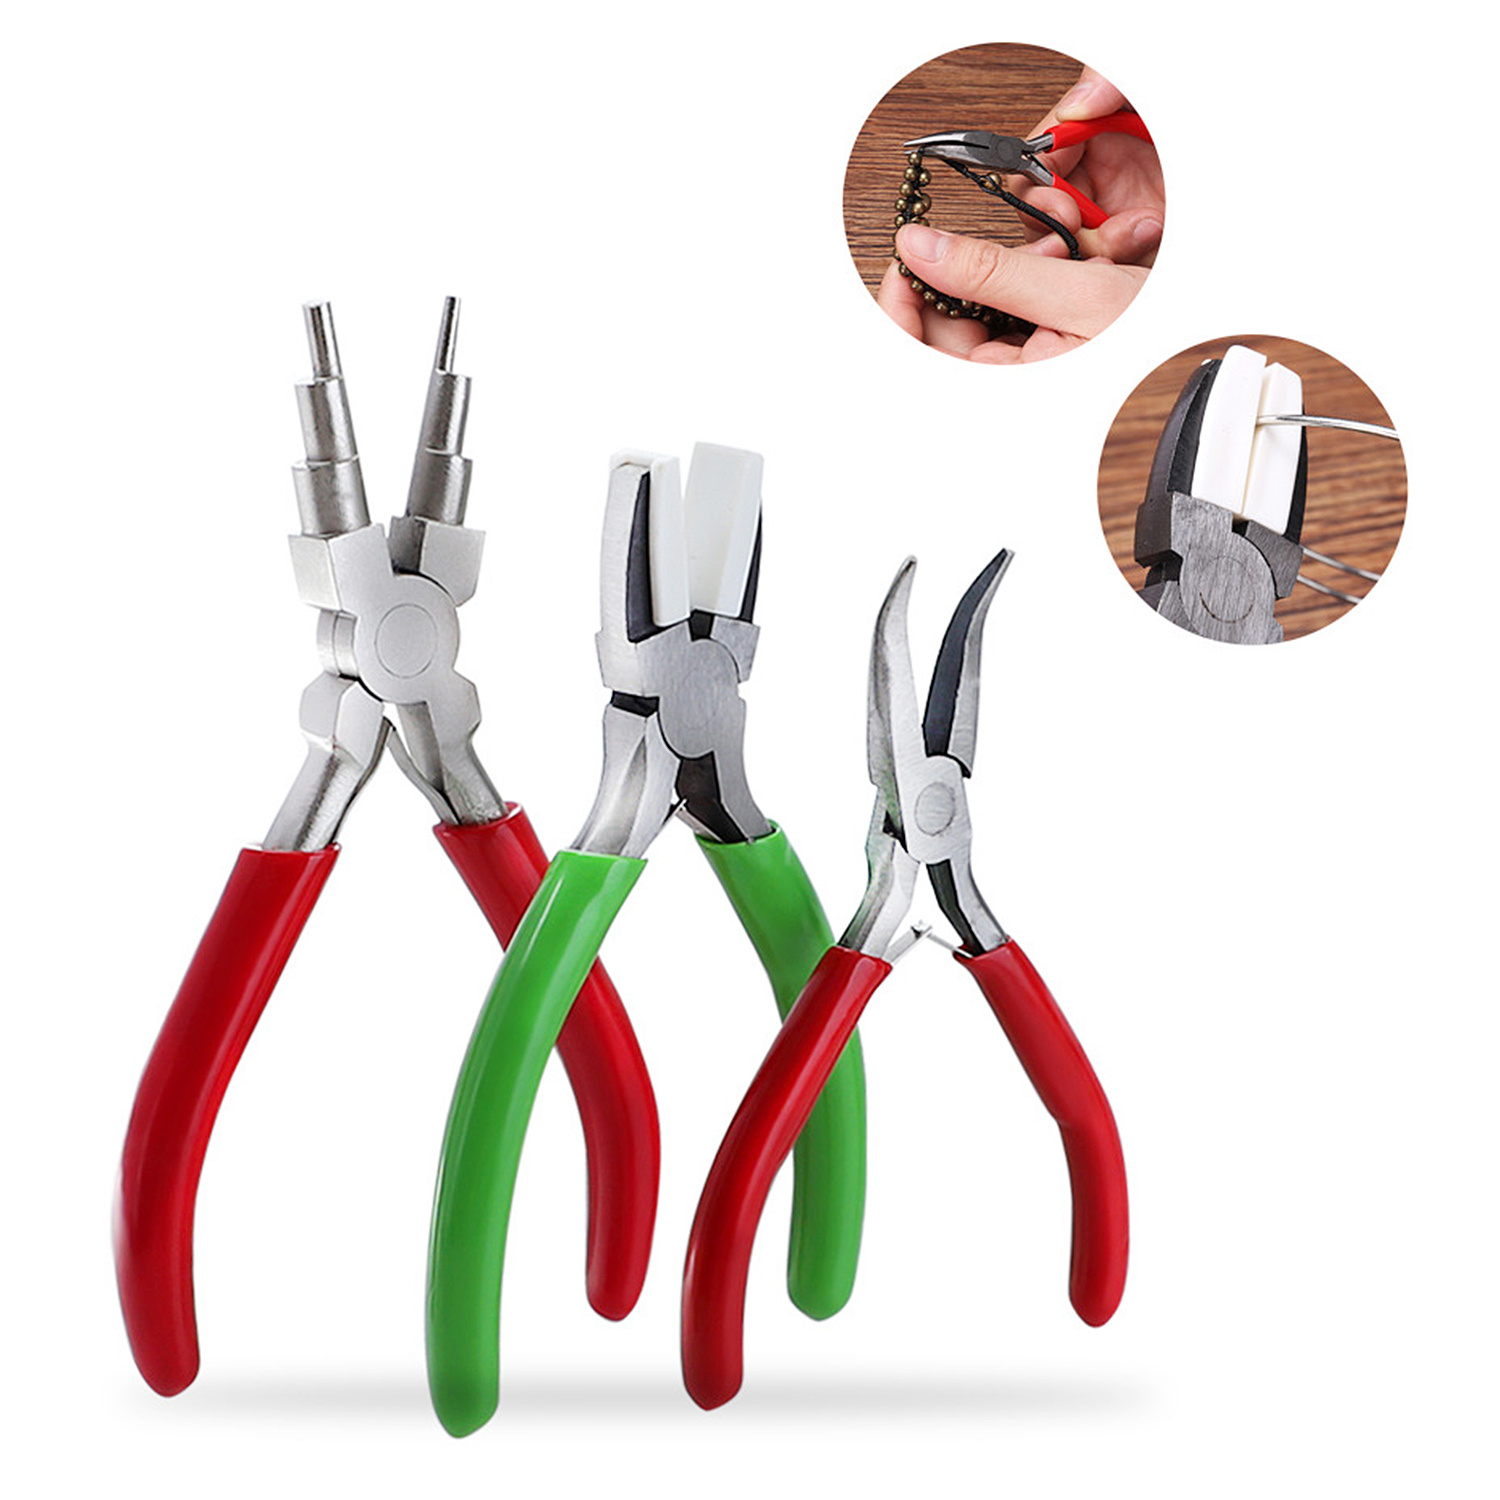 1 Wire Bending Crimping Pliers Jewelry Making Tool Holding Bending